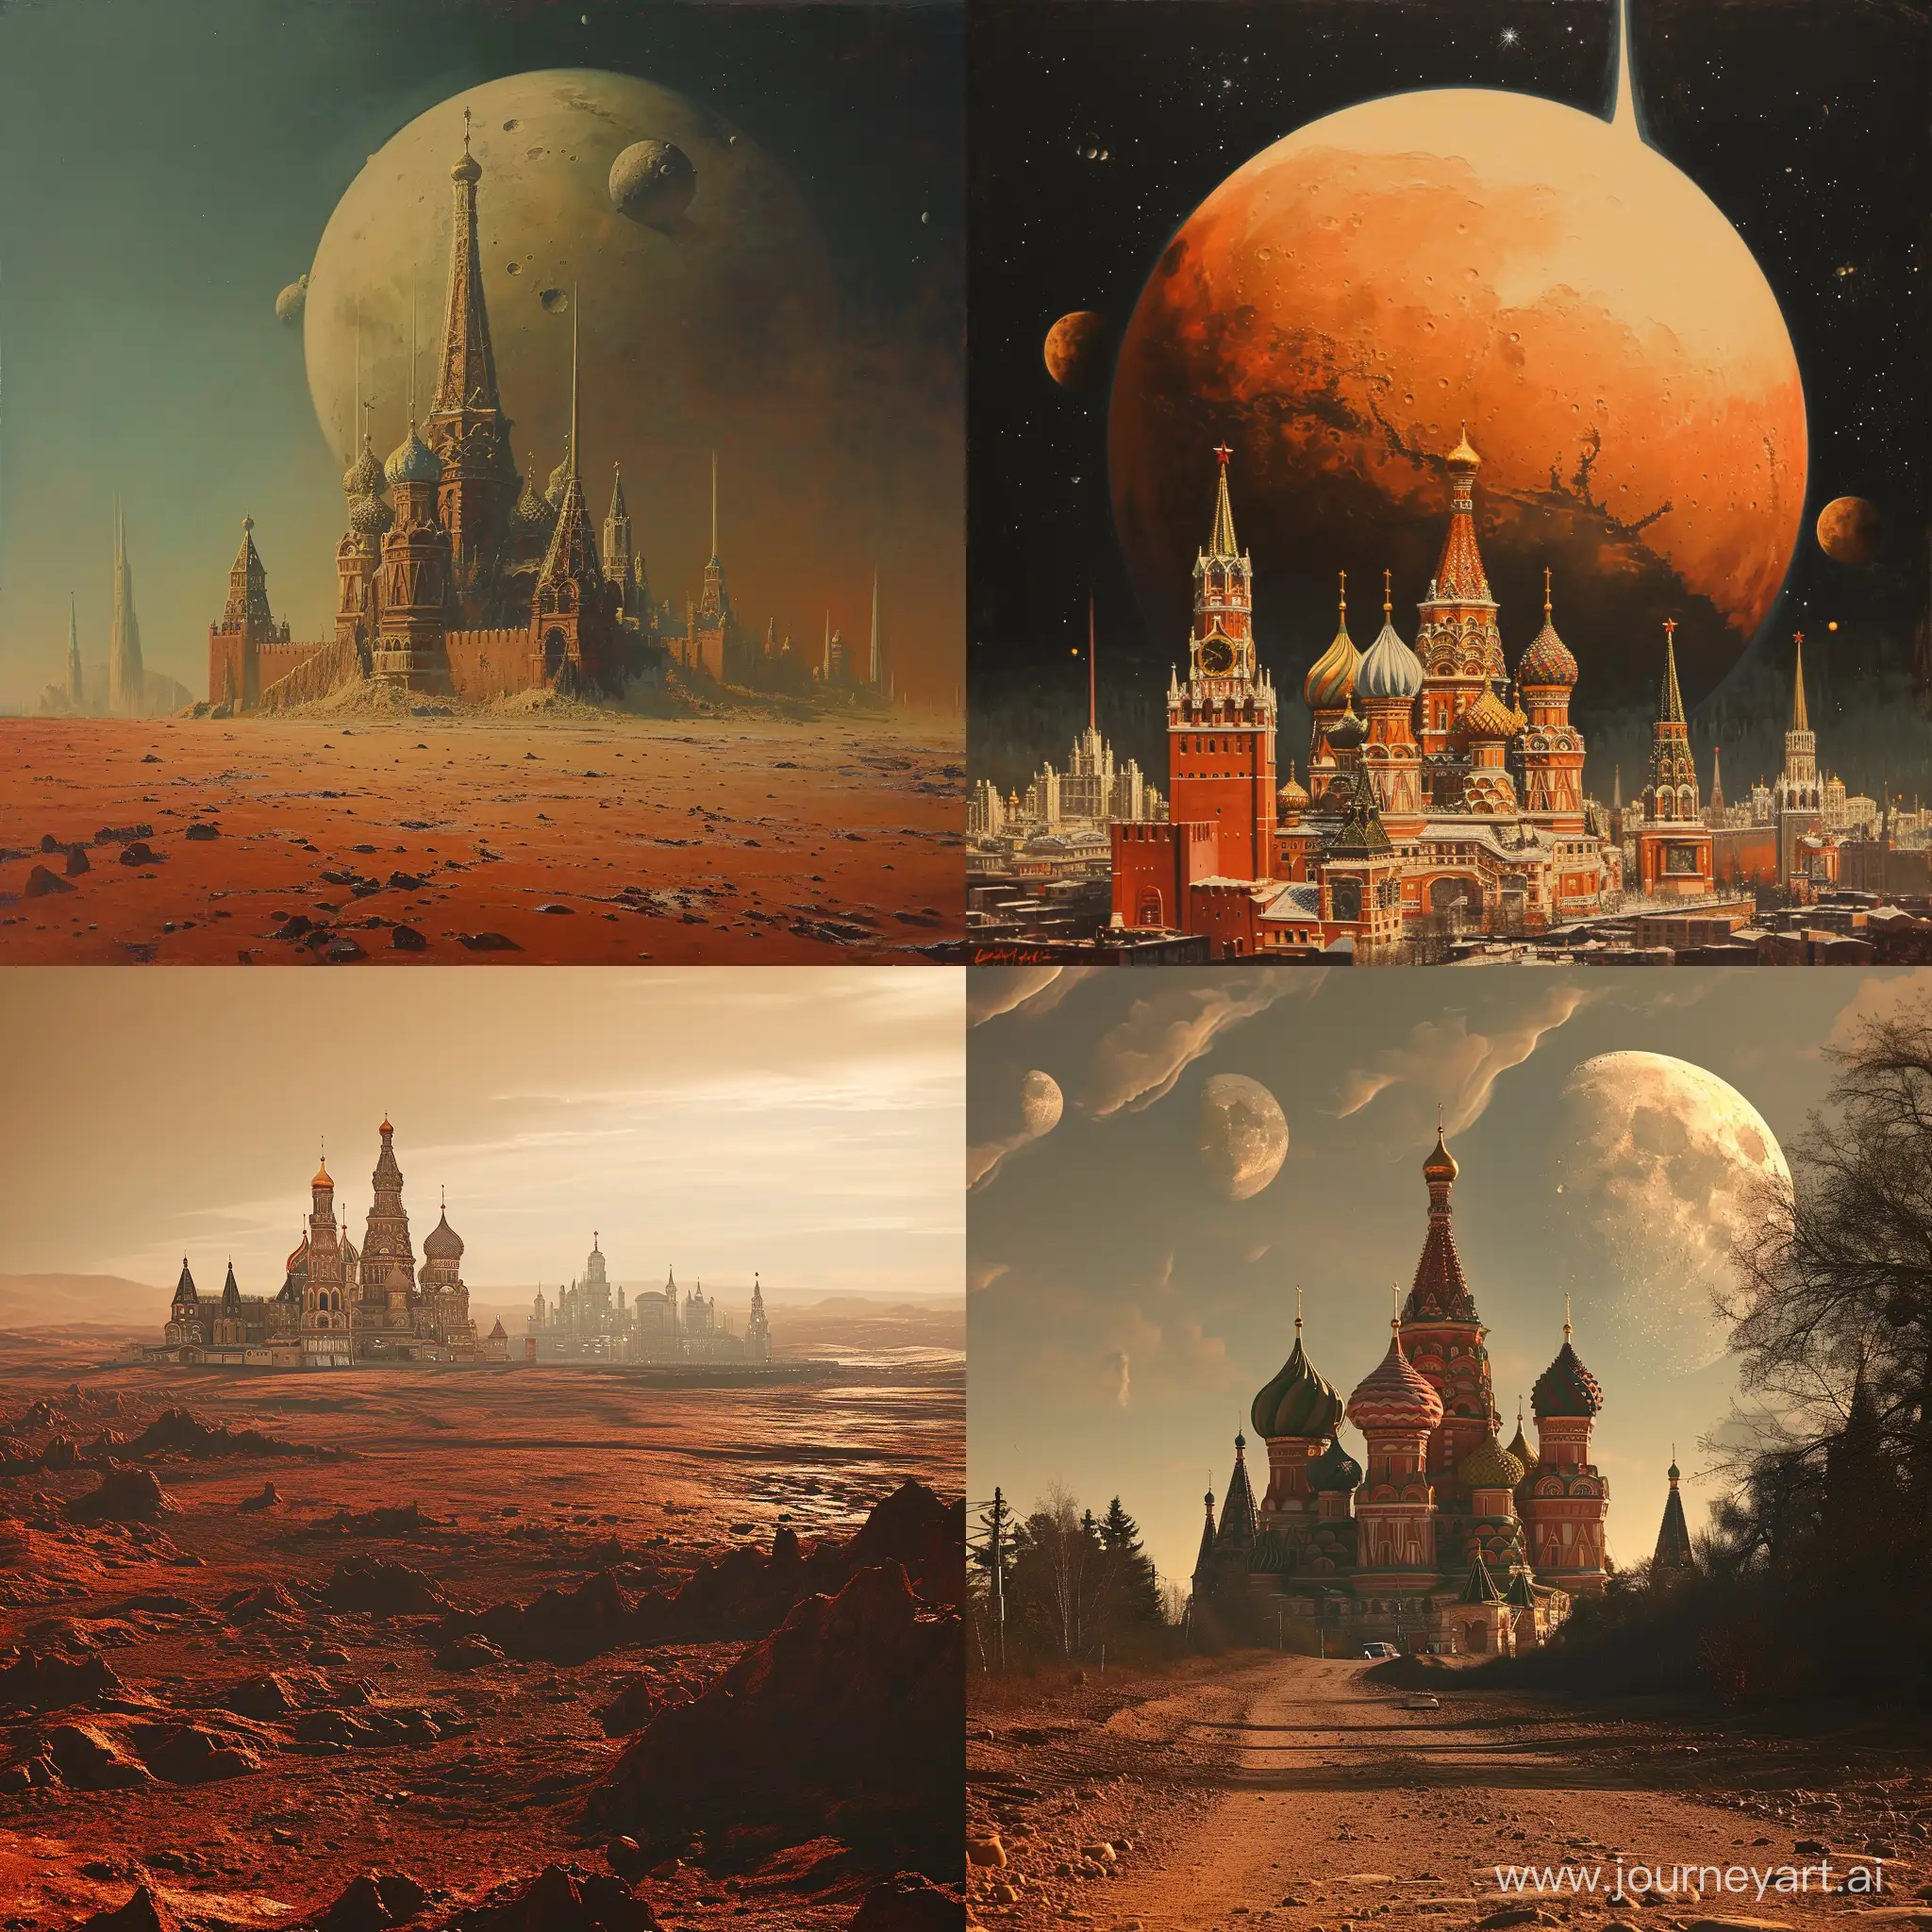 Futuristic-Moscow-Landscape-on-Mars-with-Vibrant-Colors